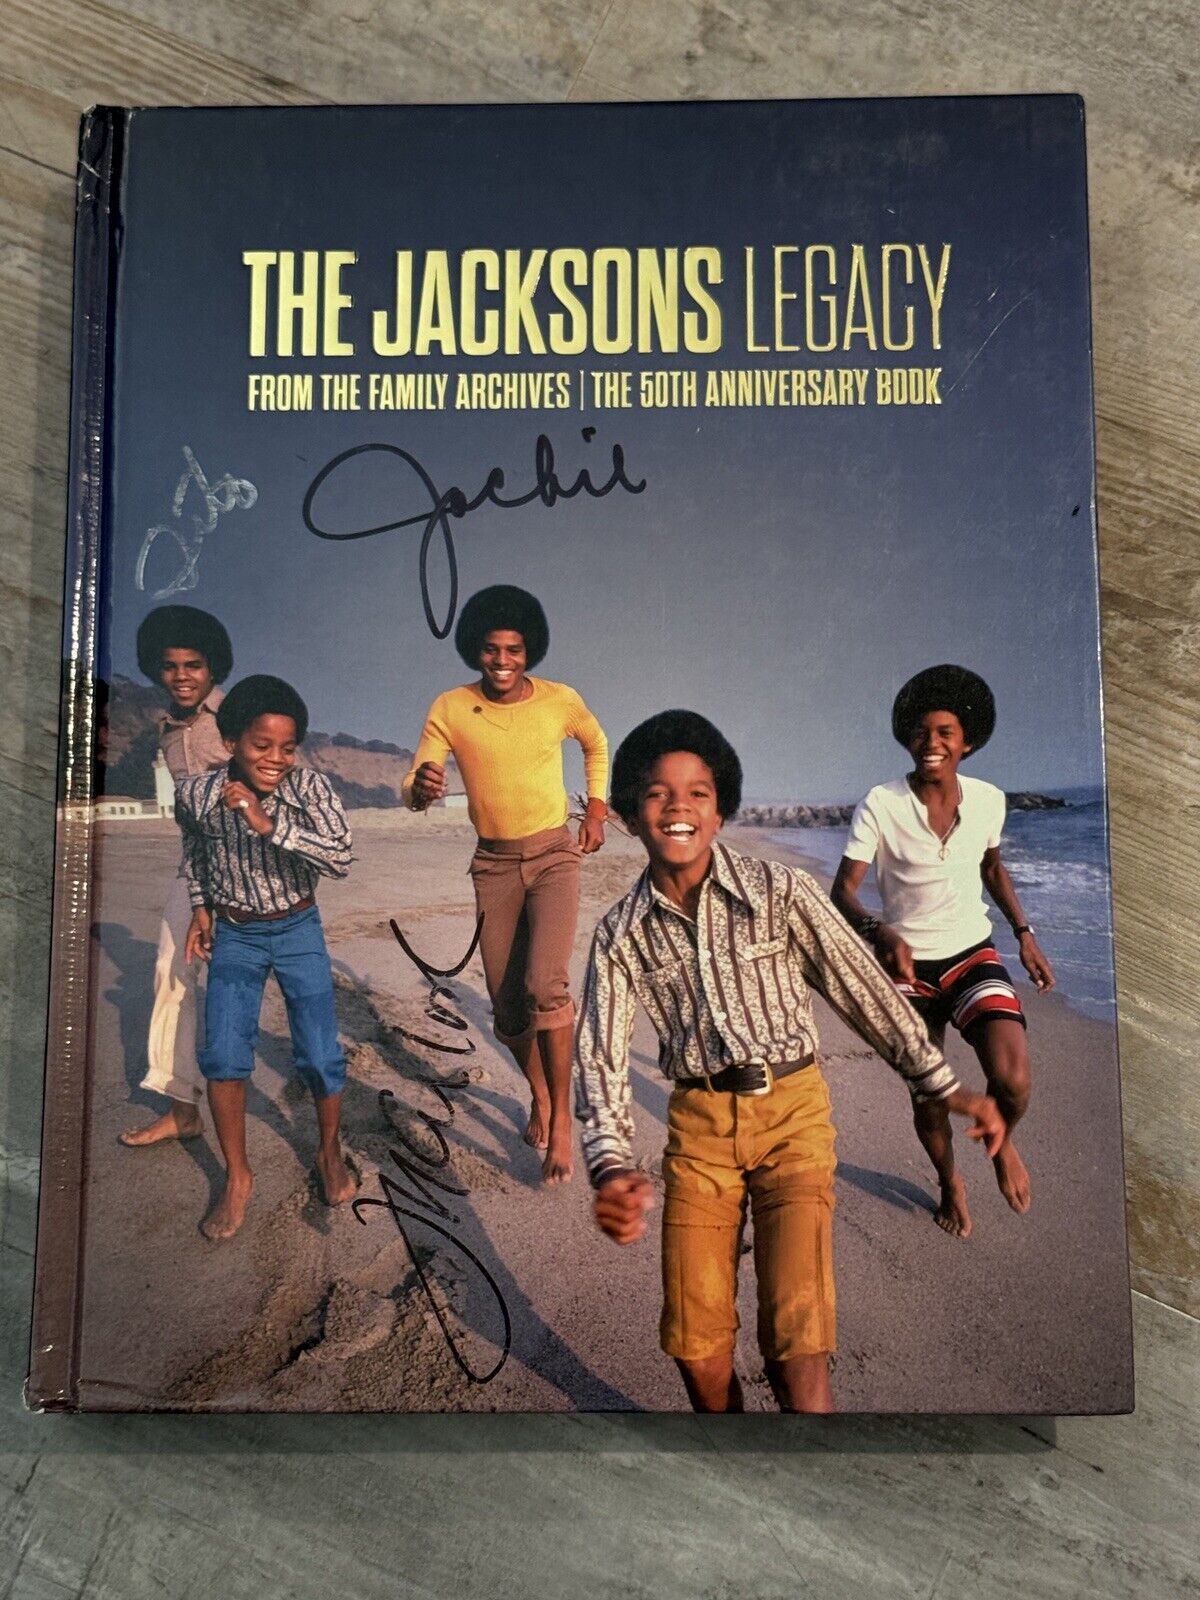 Jackson 5 Signed Book The Jacksons Legacy 50th Anniversary Book PSA Authentic